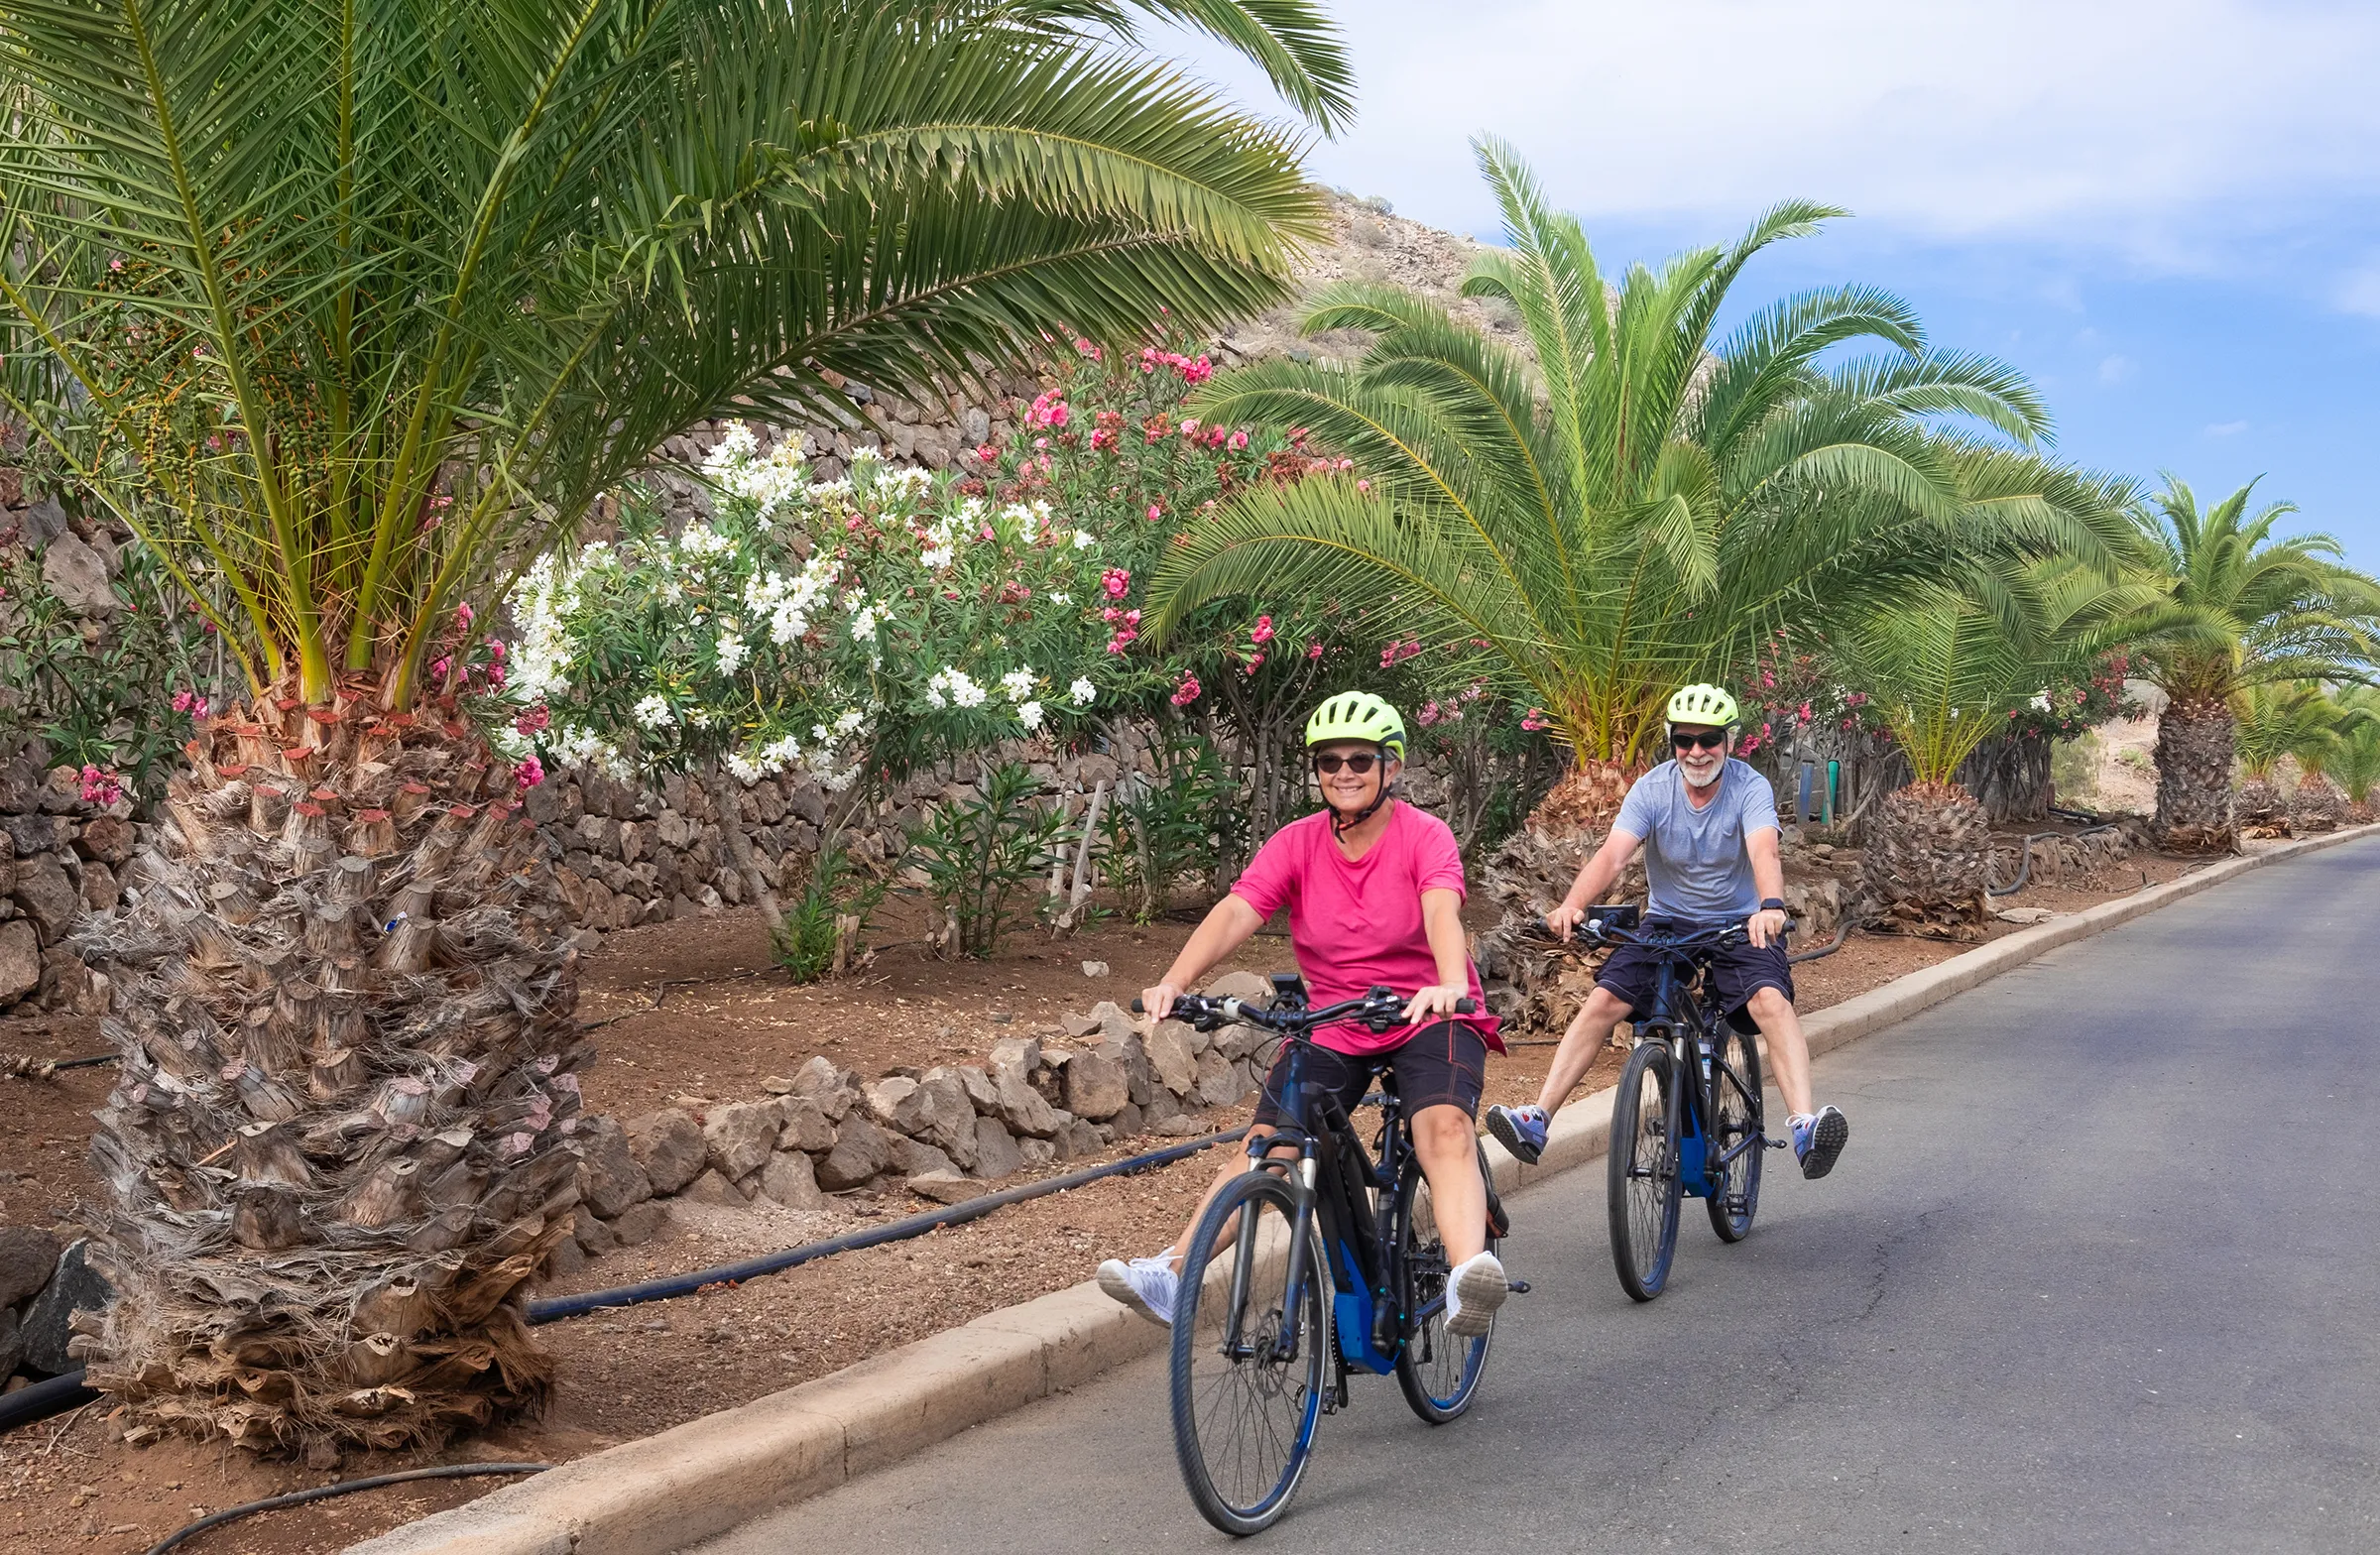 happy couple enjoying a bike ride next to large palm trees in florida